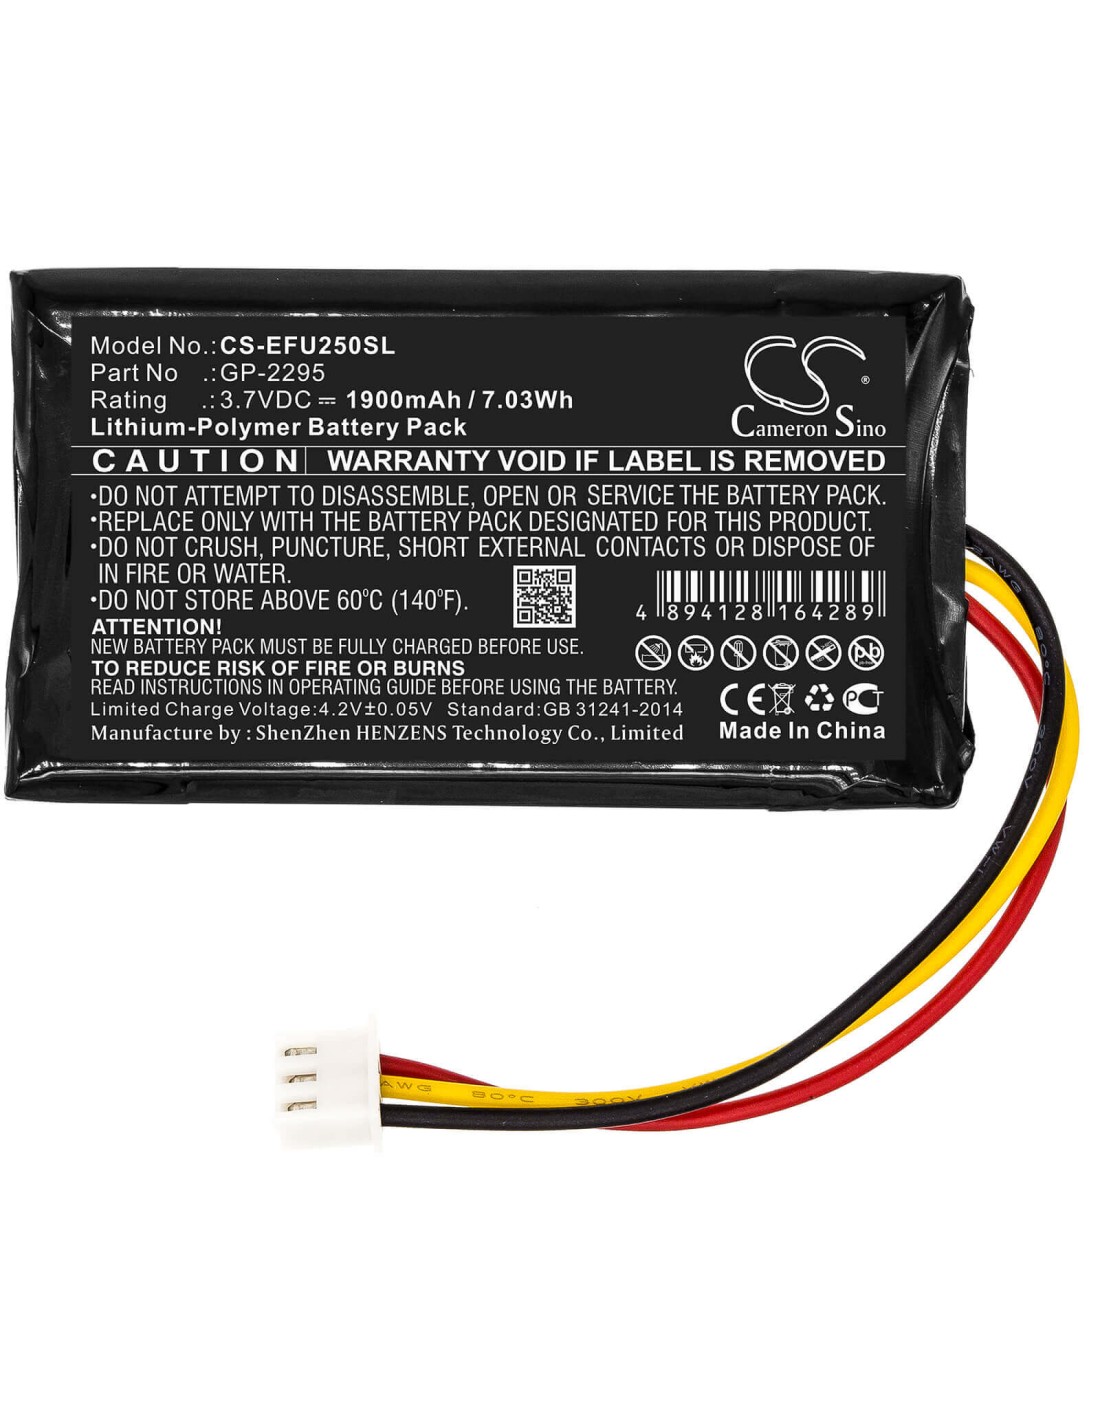 Battery for Exfo, Px1, Px1-h-pro-foas-u25, Px1-s-pro-foas-u25 3.7V, 1900mAh - 7.03Wh